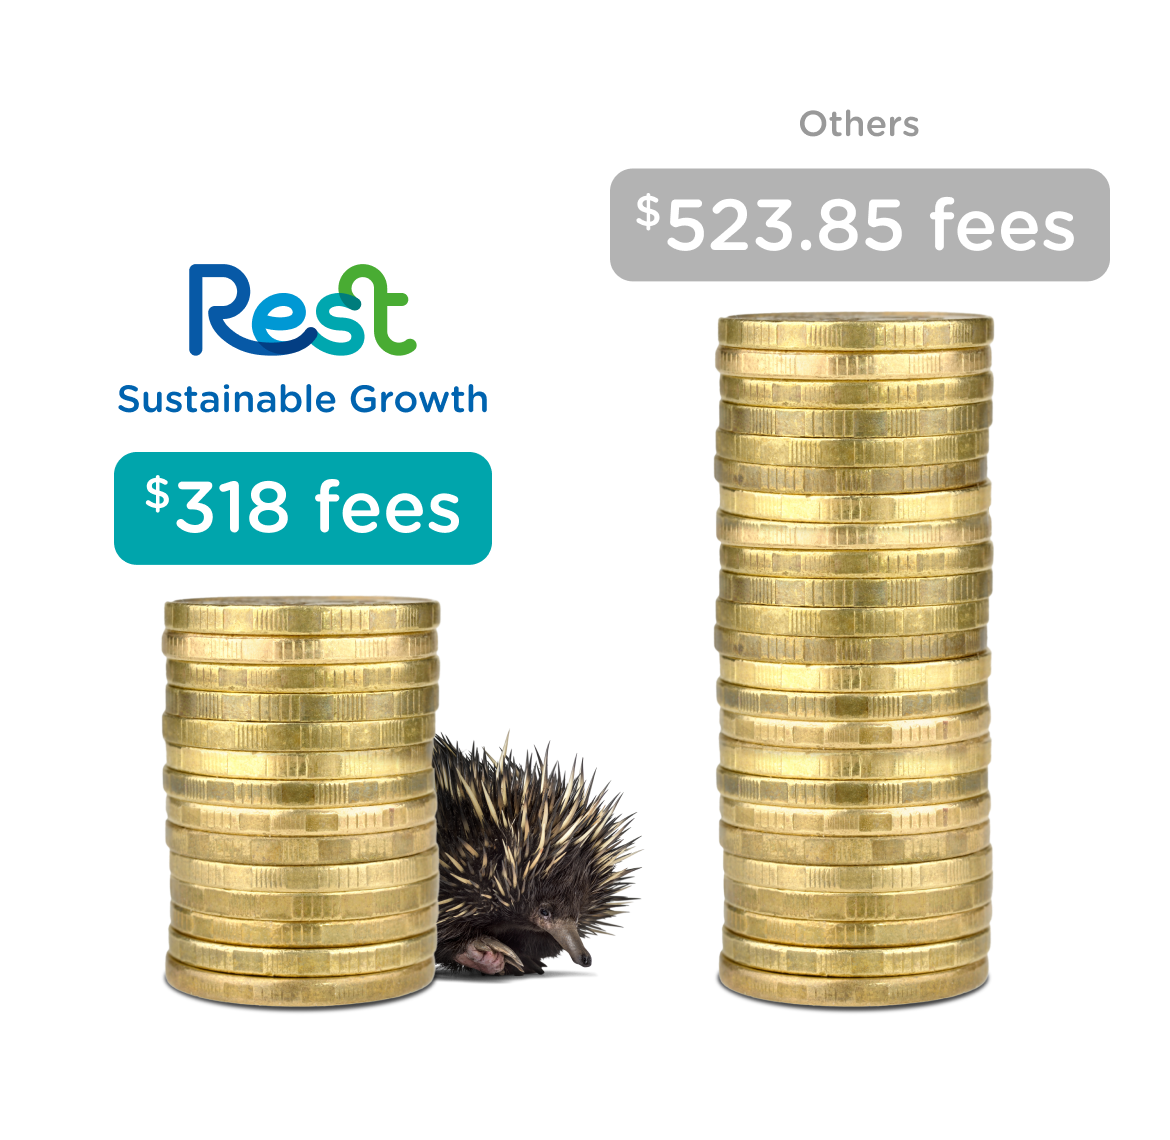 Our Sustainable Growth option has 38%* lower fees  compared with the average ethical super option.